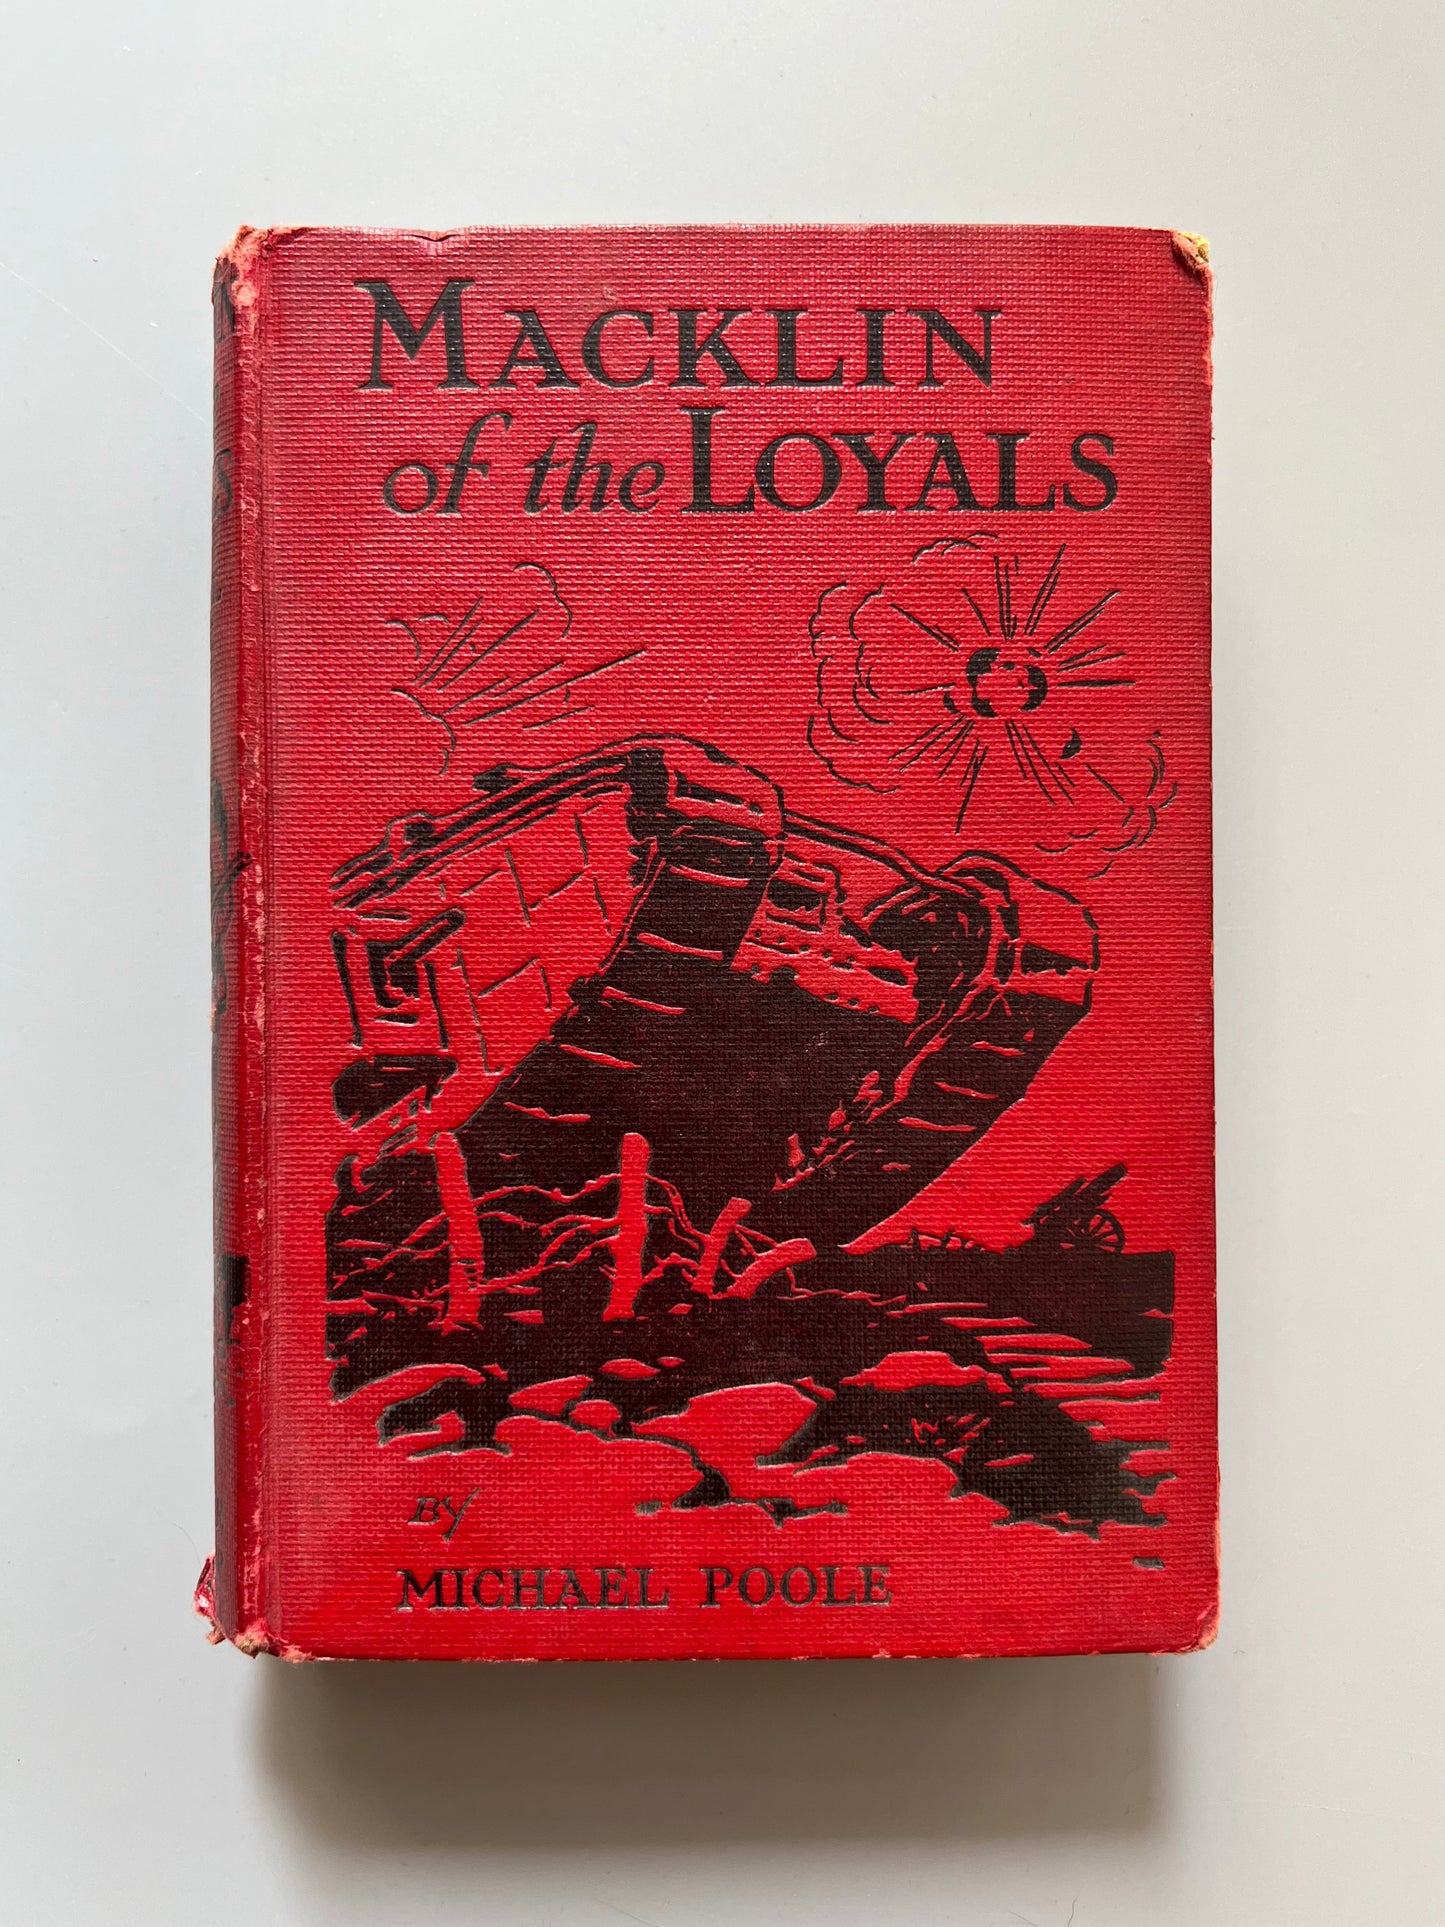 Macklin of the loyals, Michael Poole - Goodship house, ca. 1920